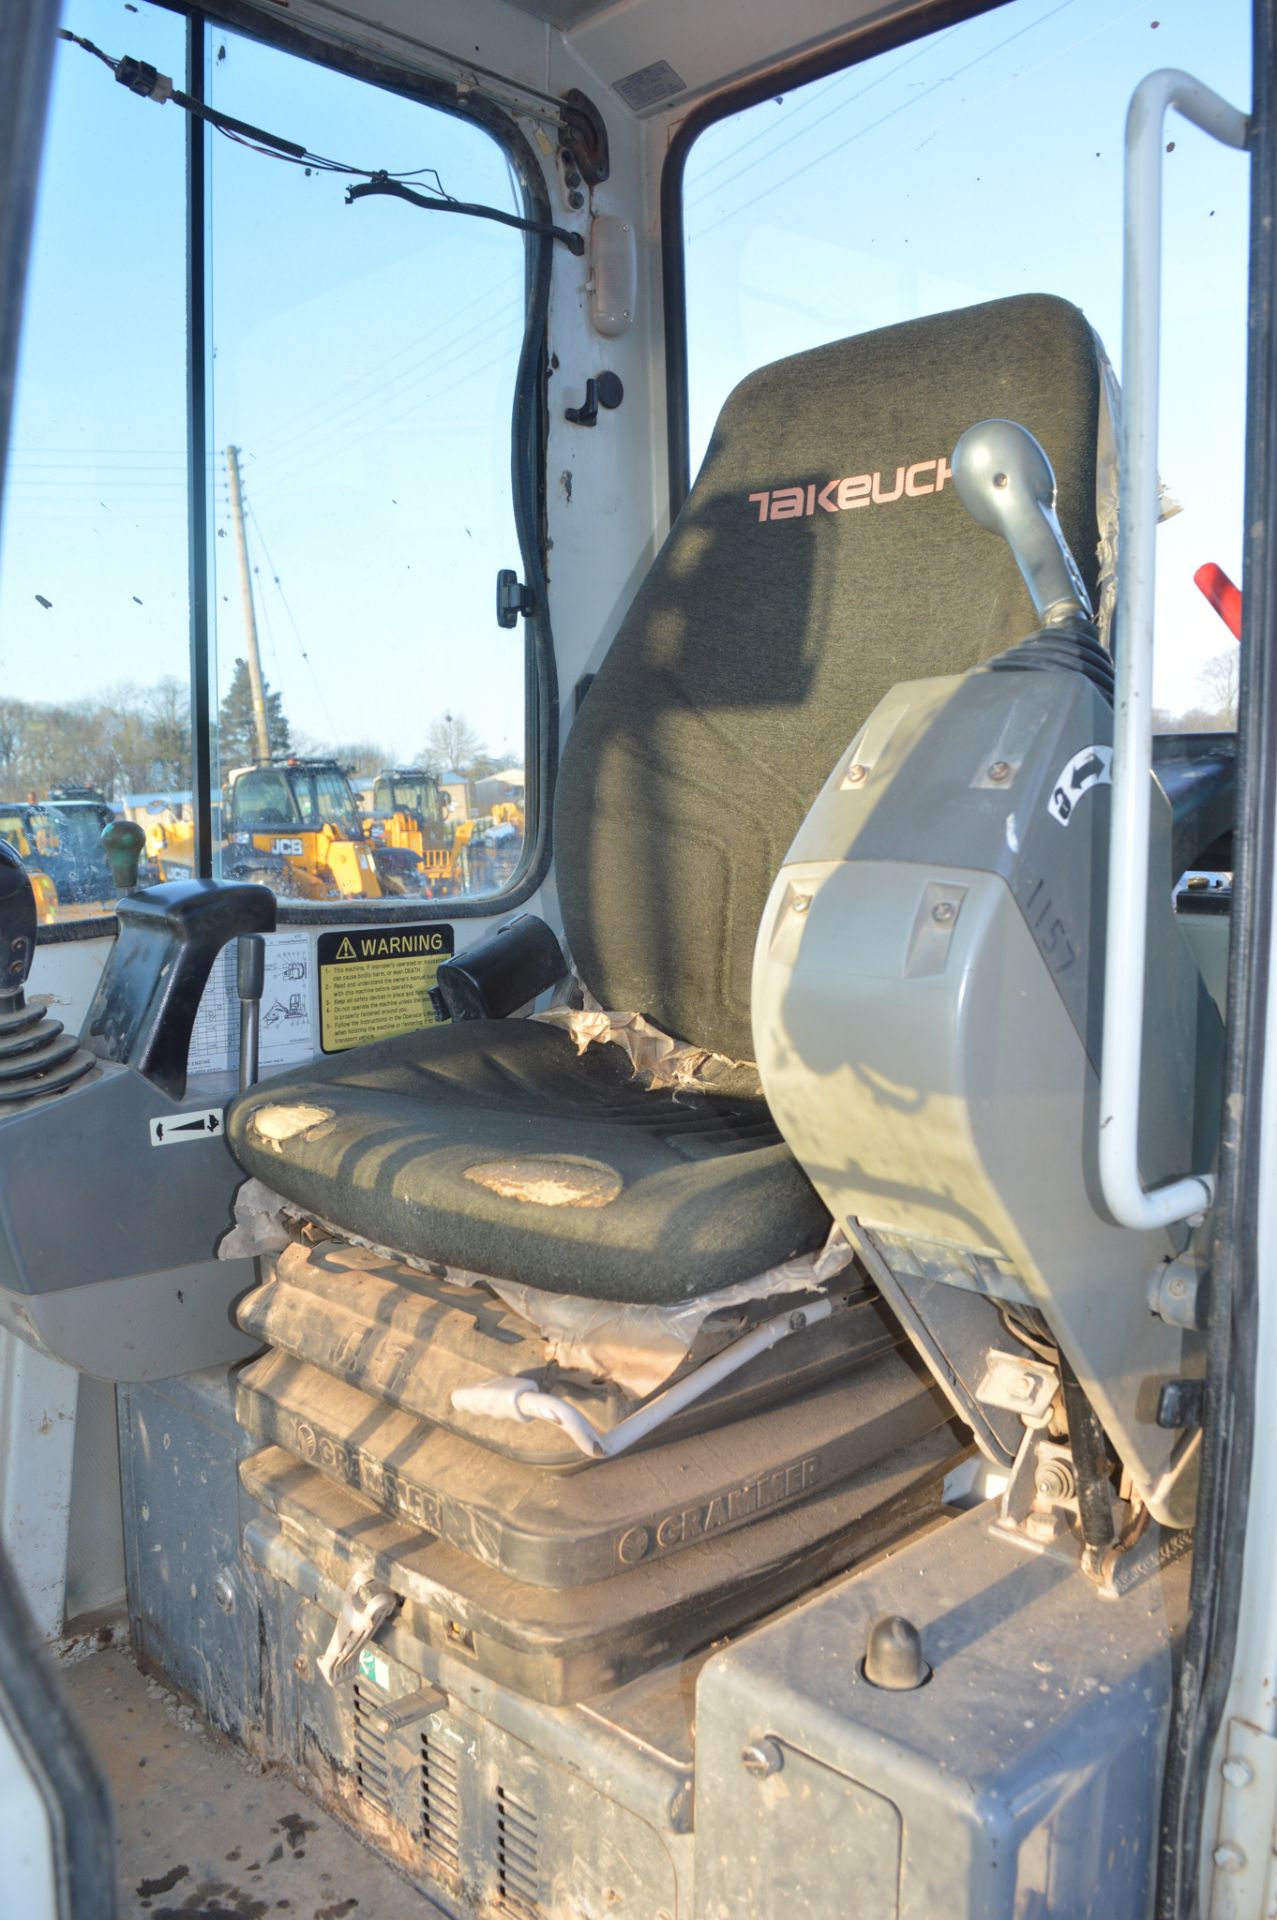 Takeuchi TB125 2.5 tonne rubber tracked mini excavator Year: 2008 S/N: 12519500 Recorded hours: 5737 - Image 11 of 11